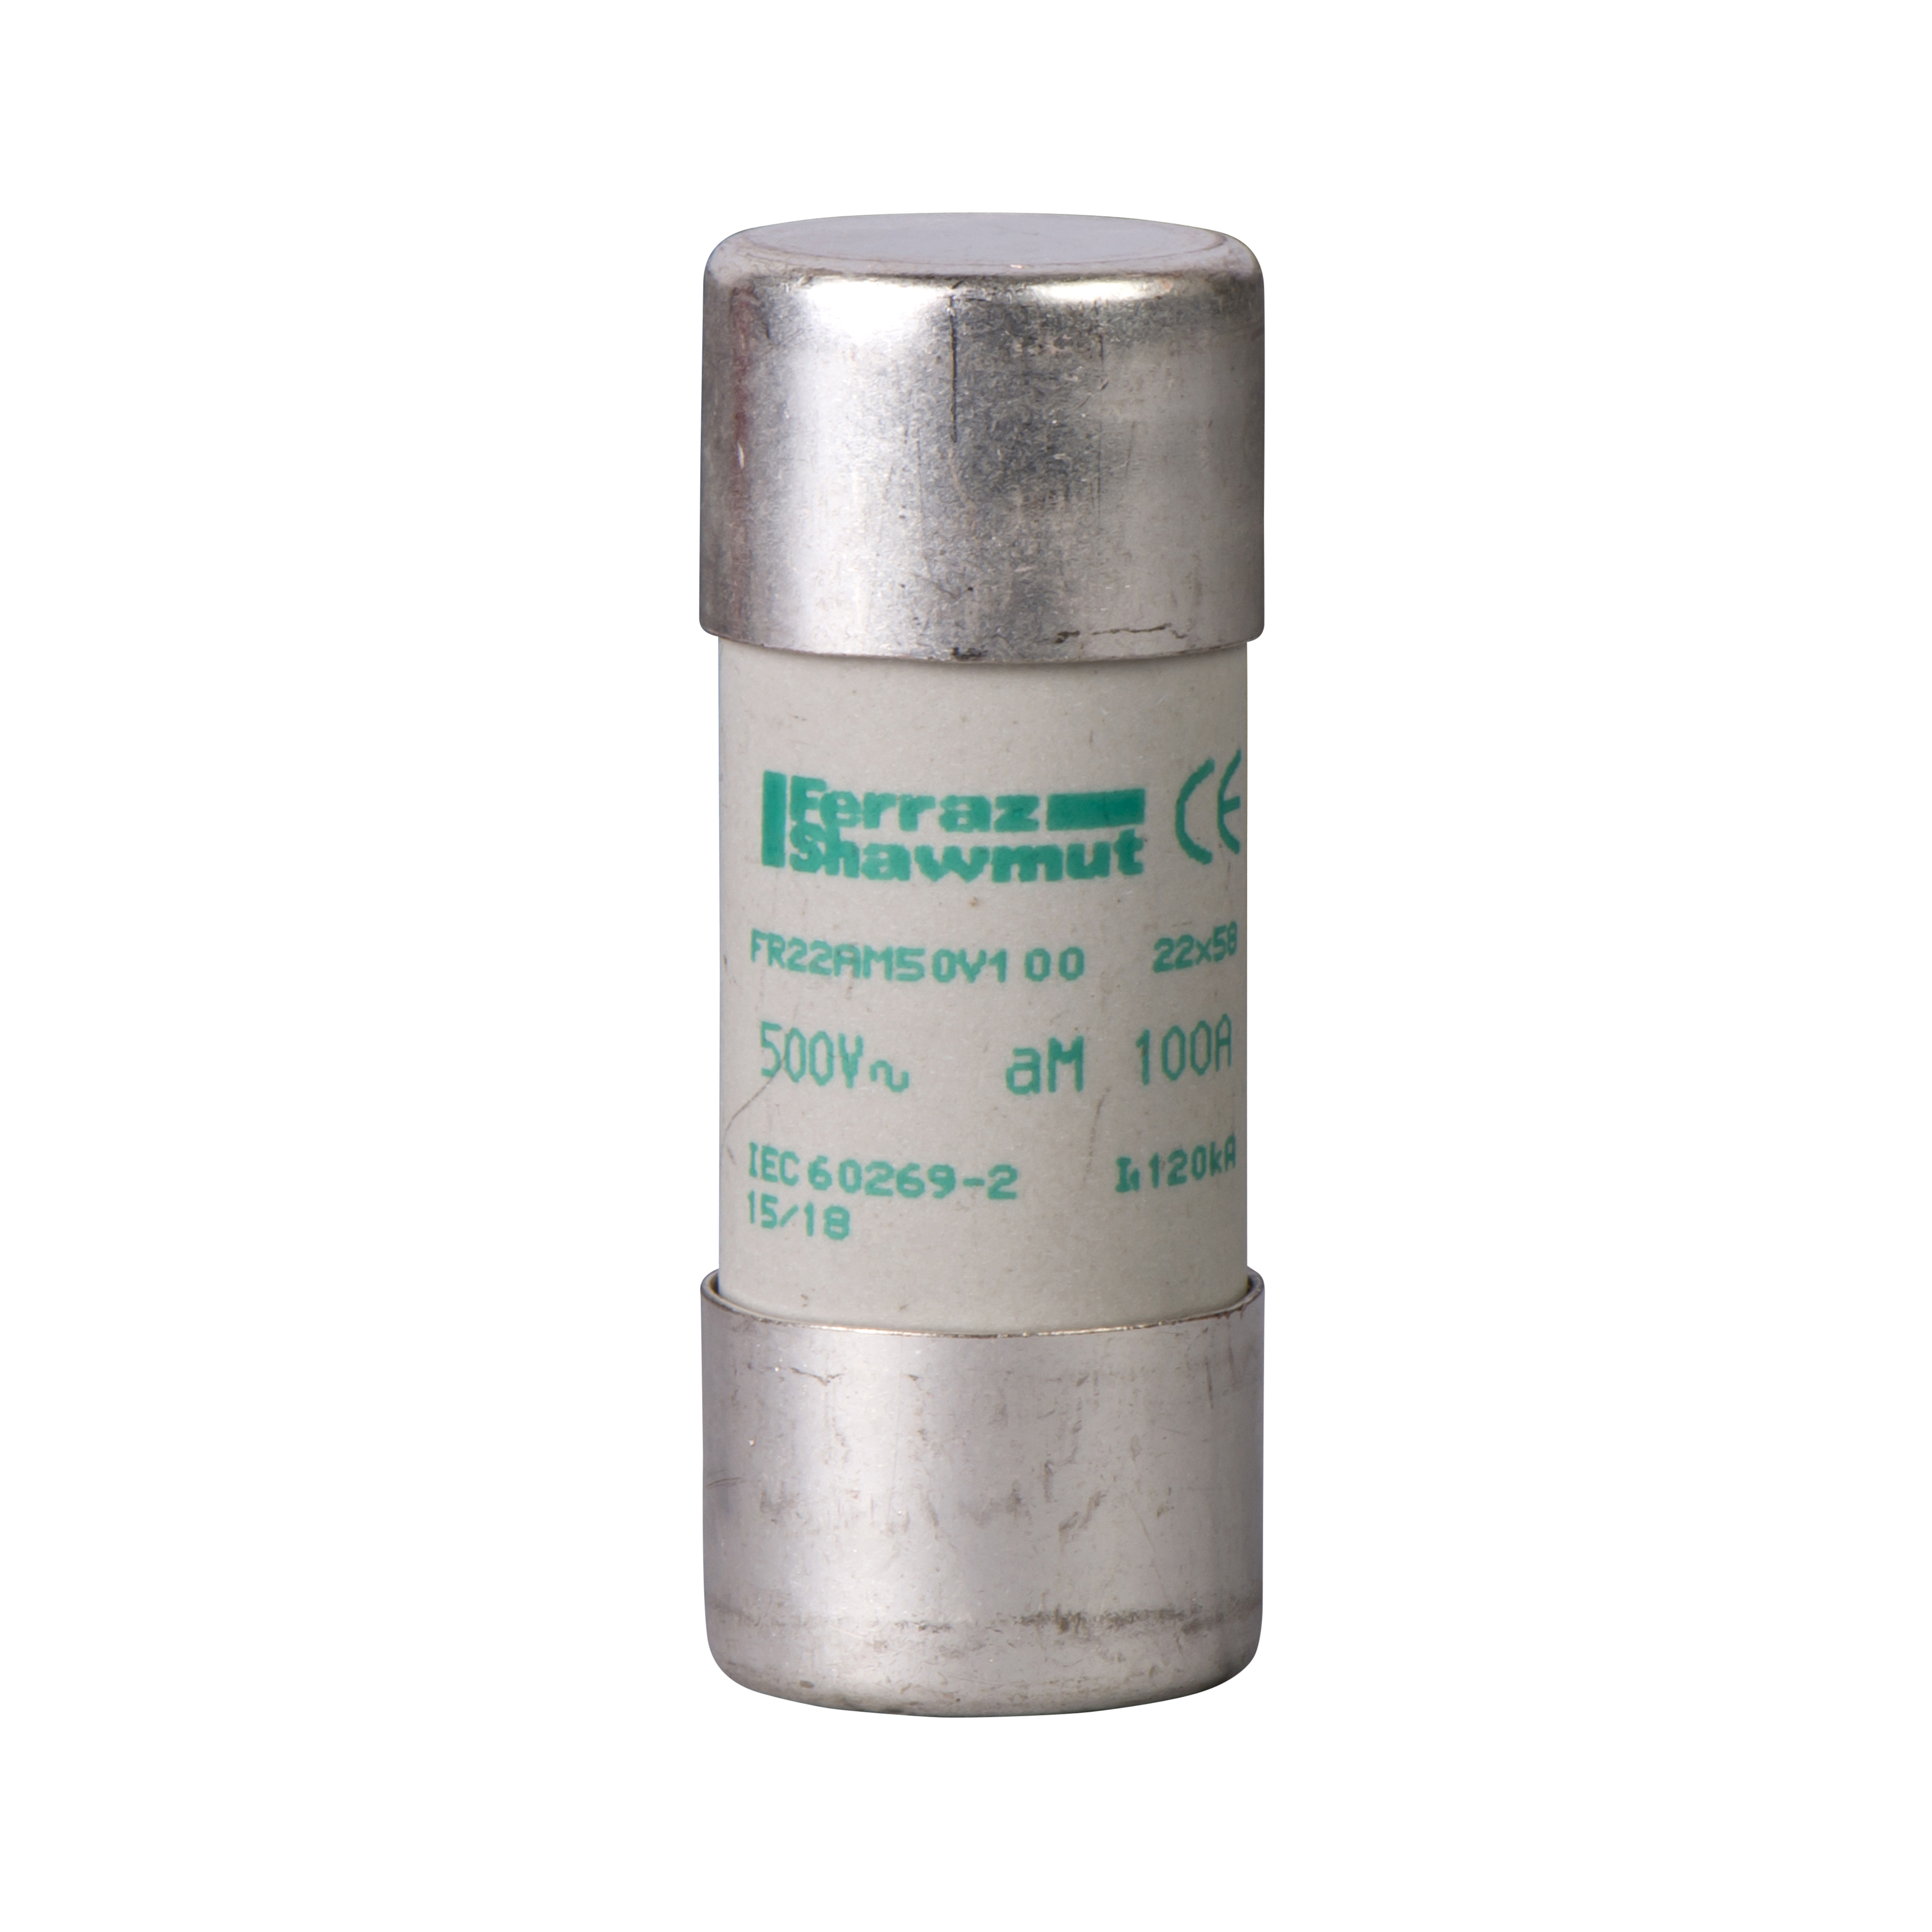 NFC cartridge fuses, TeSys GS, cylindrical, 22mm x 58mm, fuse type aM, 690VAC, 40A, without striker